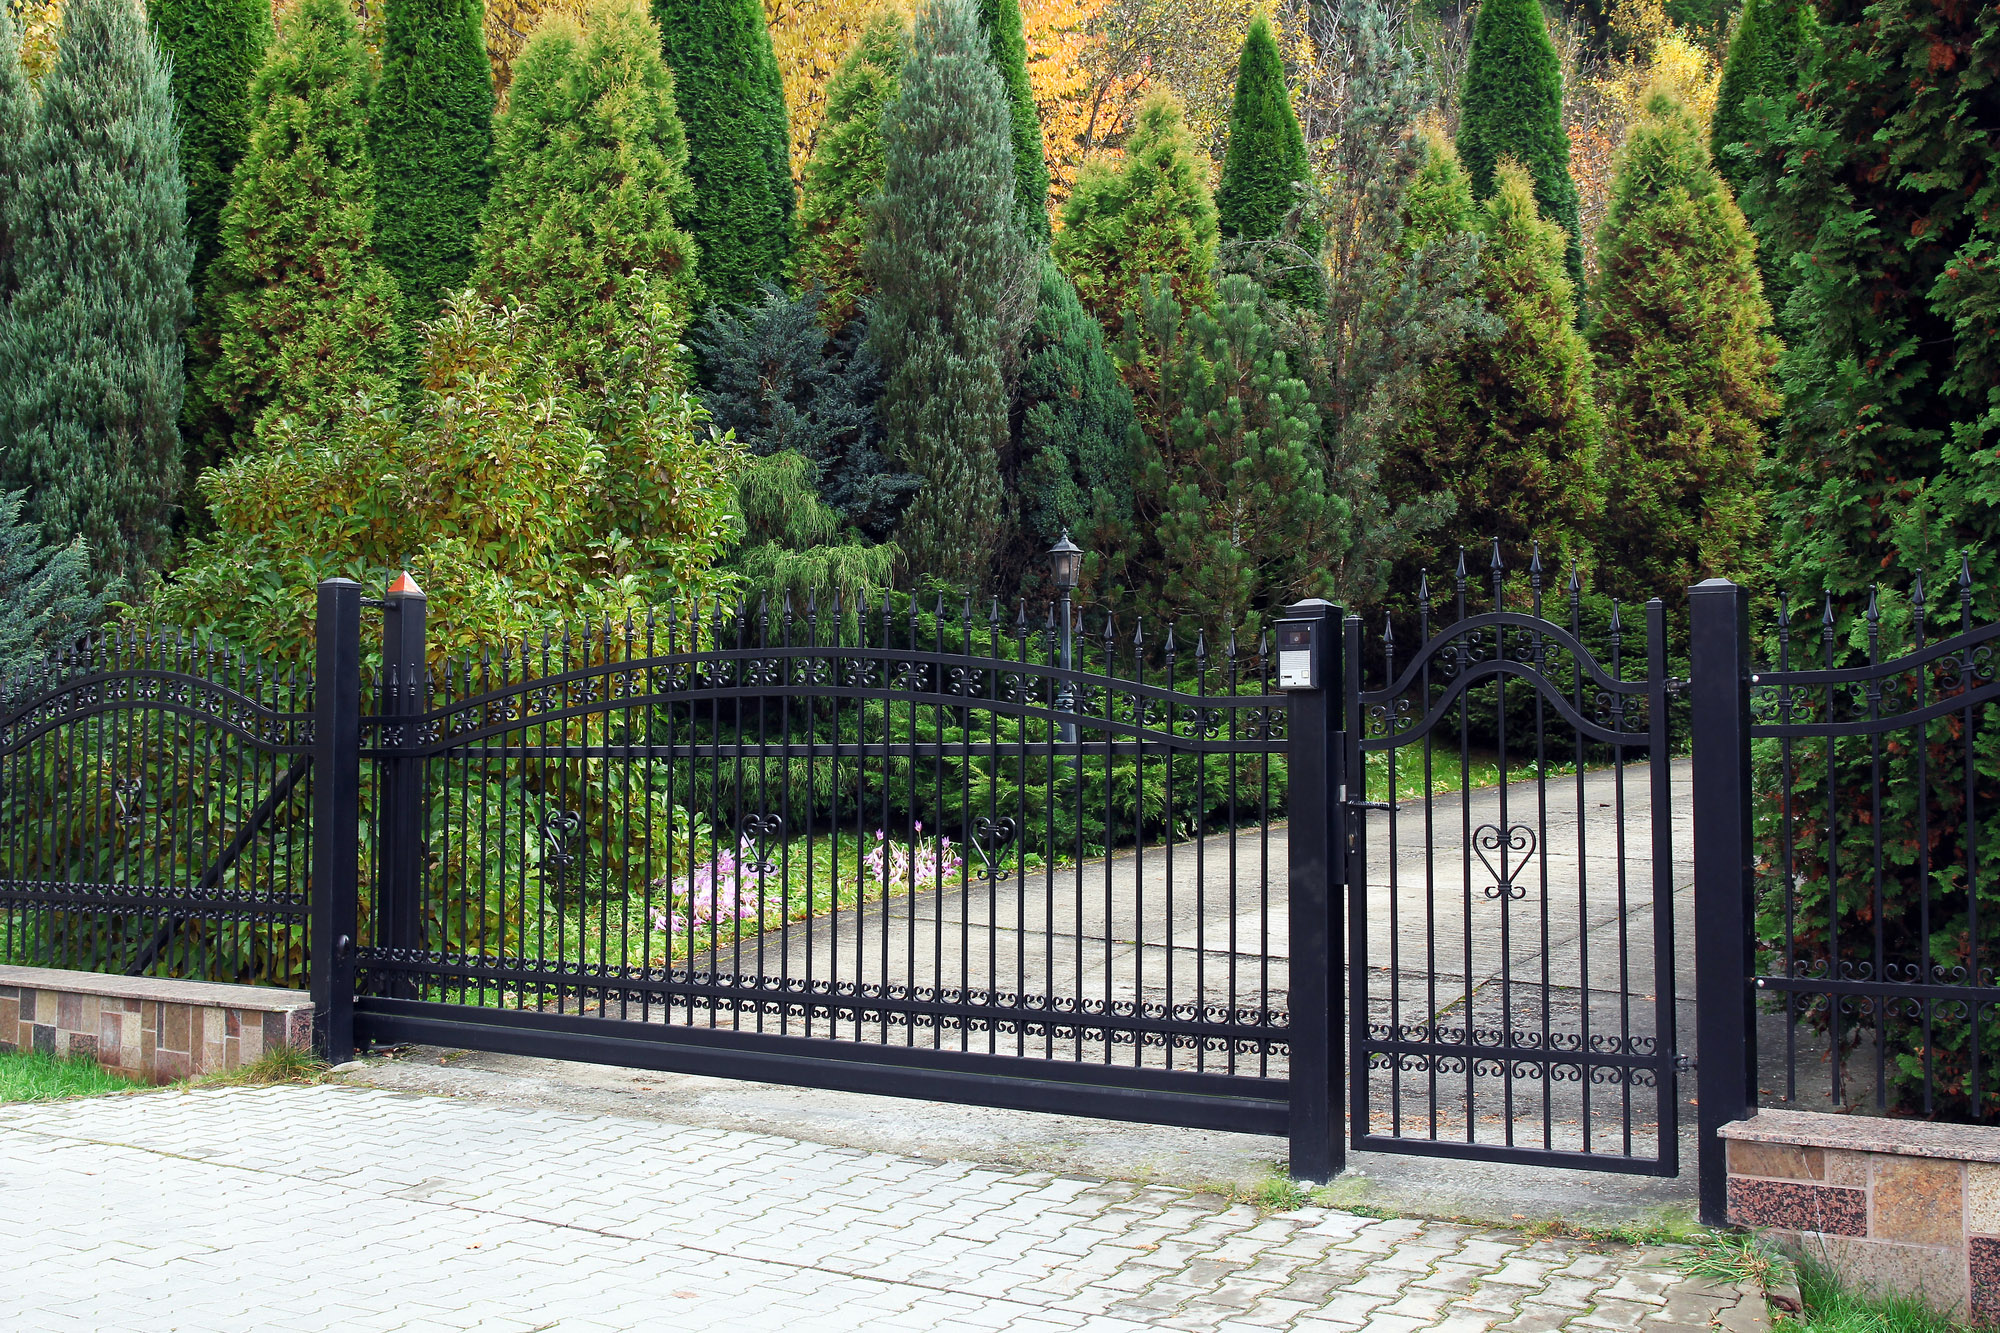 Electric gate at the foot of a stone paved driveway